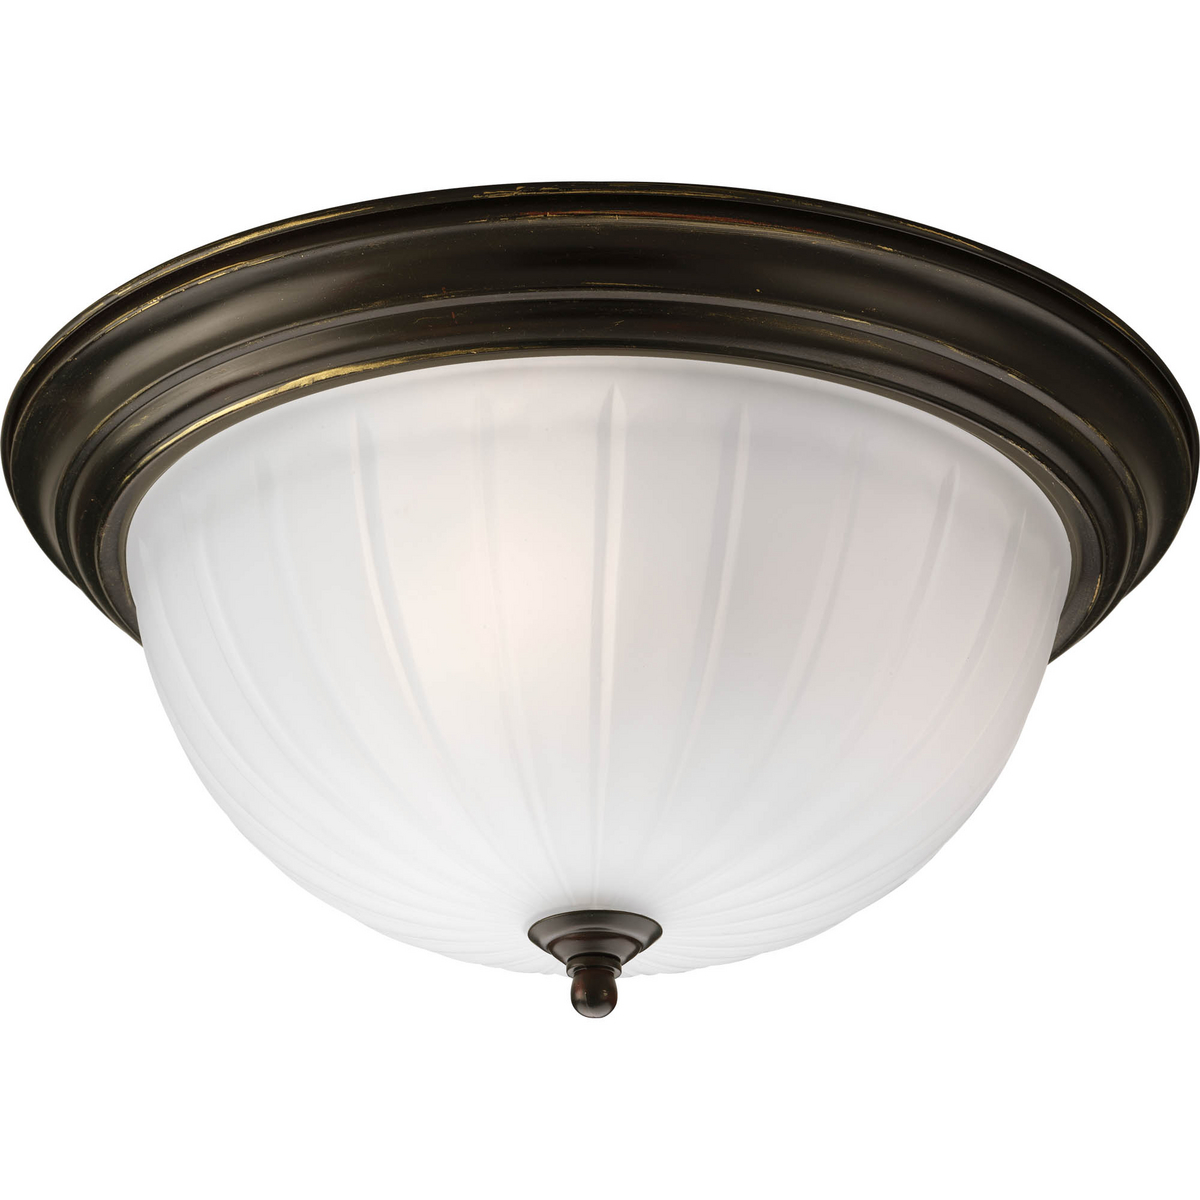 Three-light close-to-ceiling with etched ribbed melon glass with center lock up in Antique Bronze finish.